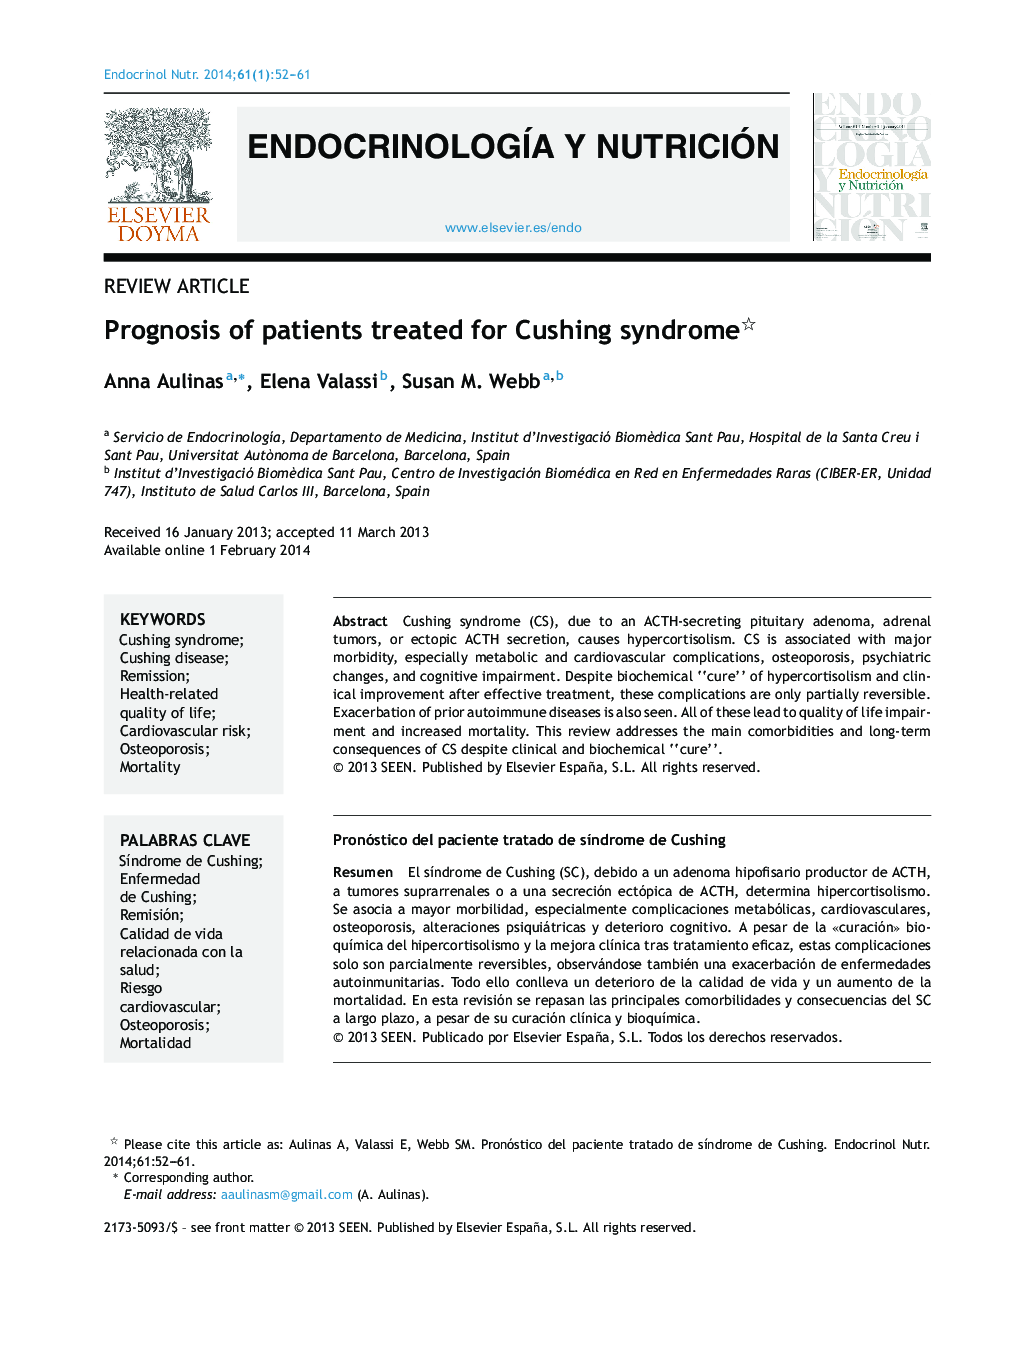 Prognosis of patients treated for Cushing syndrome 